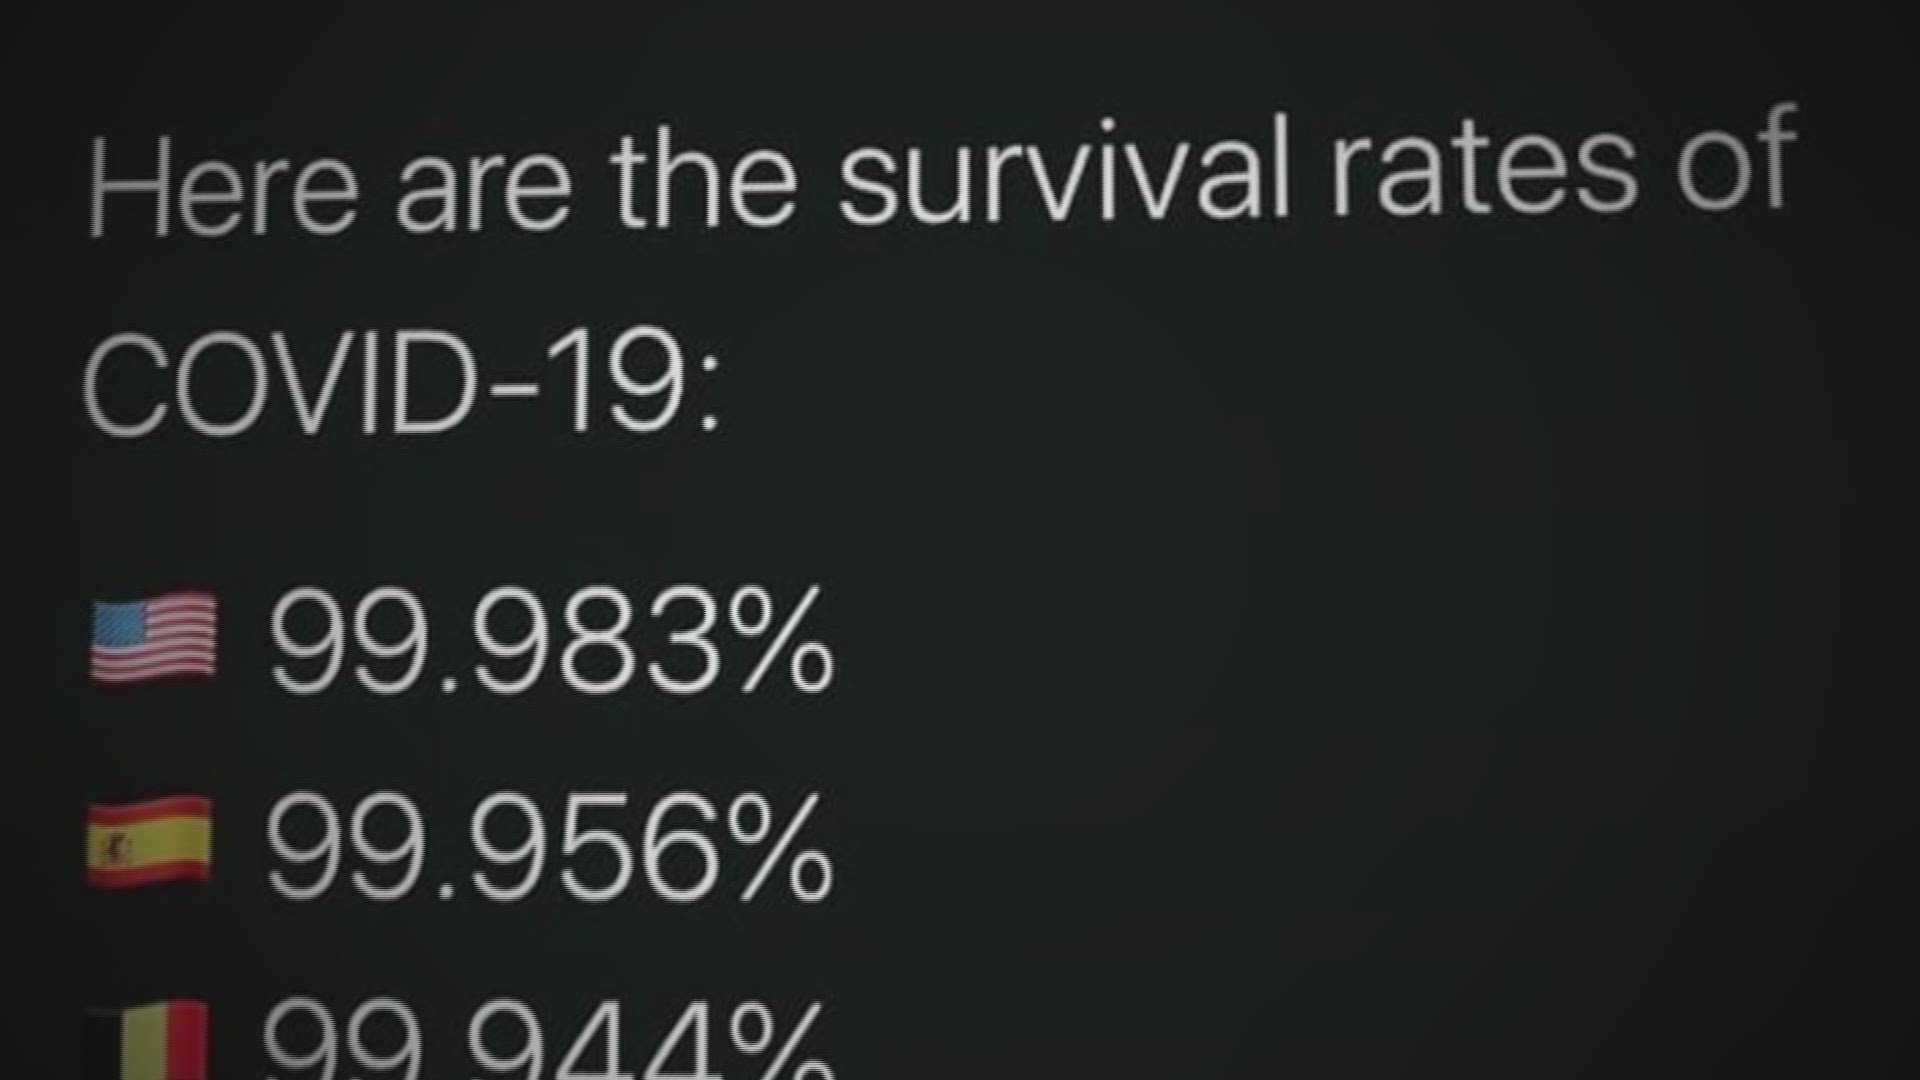 The true survival rate is lower than the one depicted in this post.